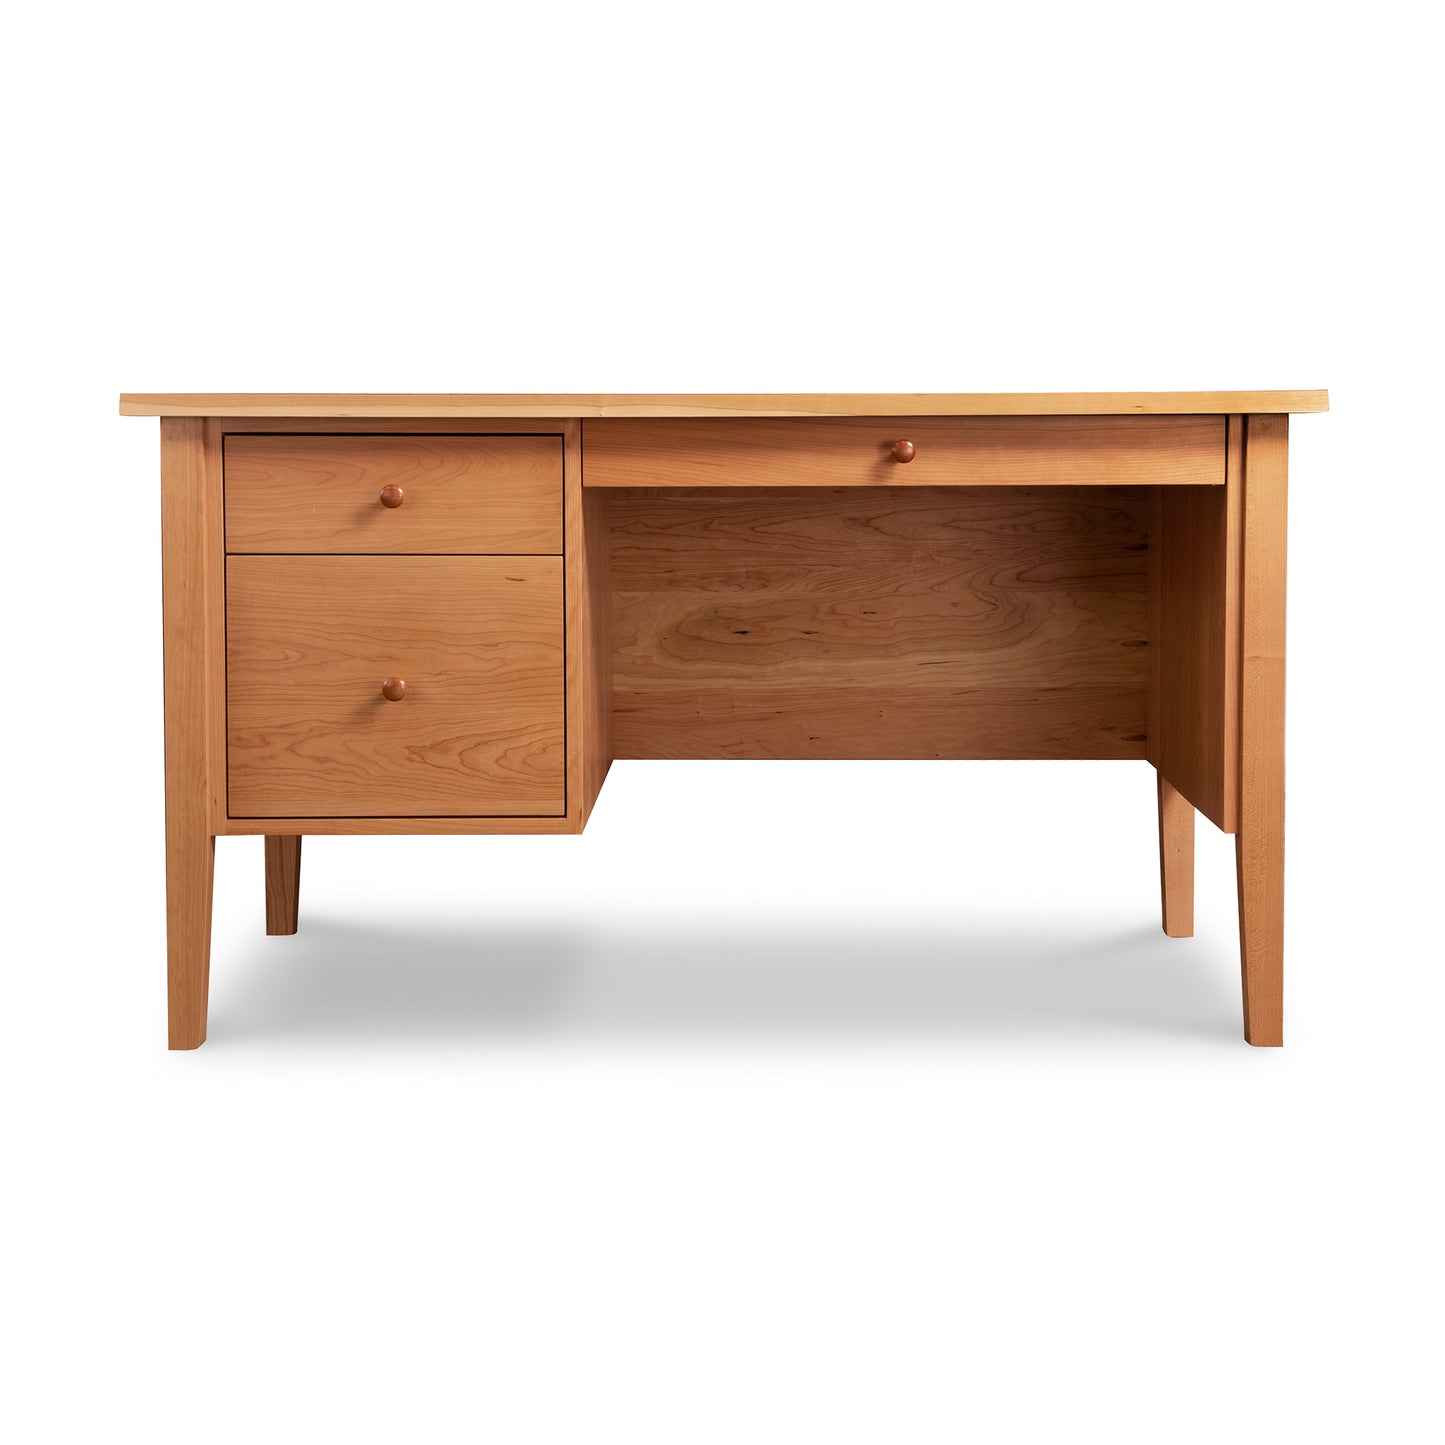 A Lyndon Furniture Small Wood Executive Desk with two drawers for storage.